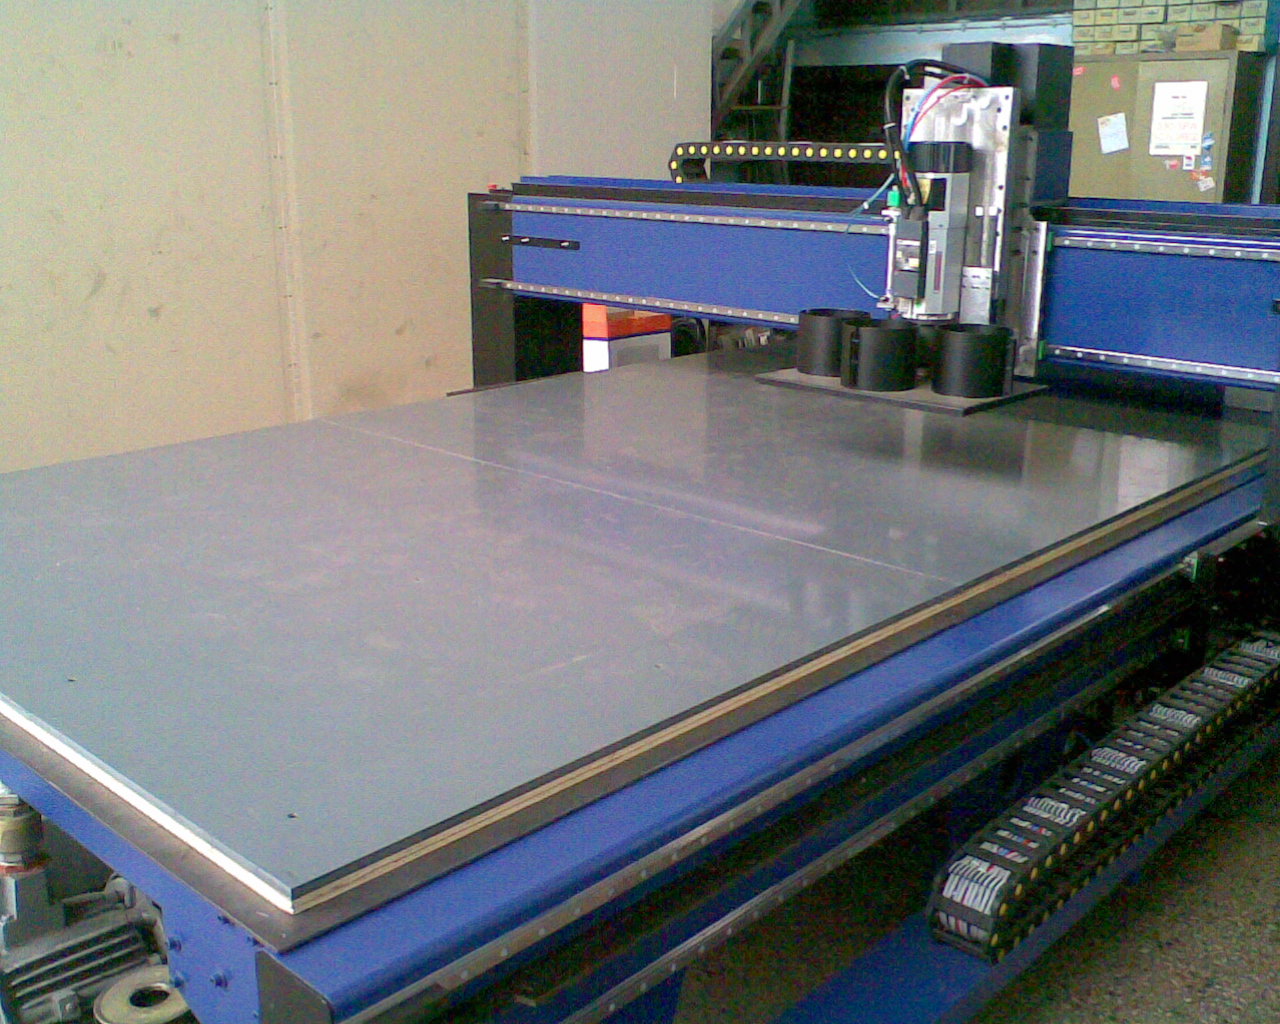 A CNC router is in an application.